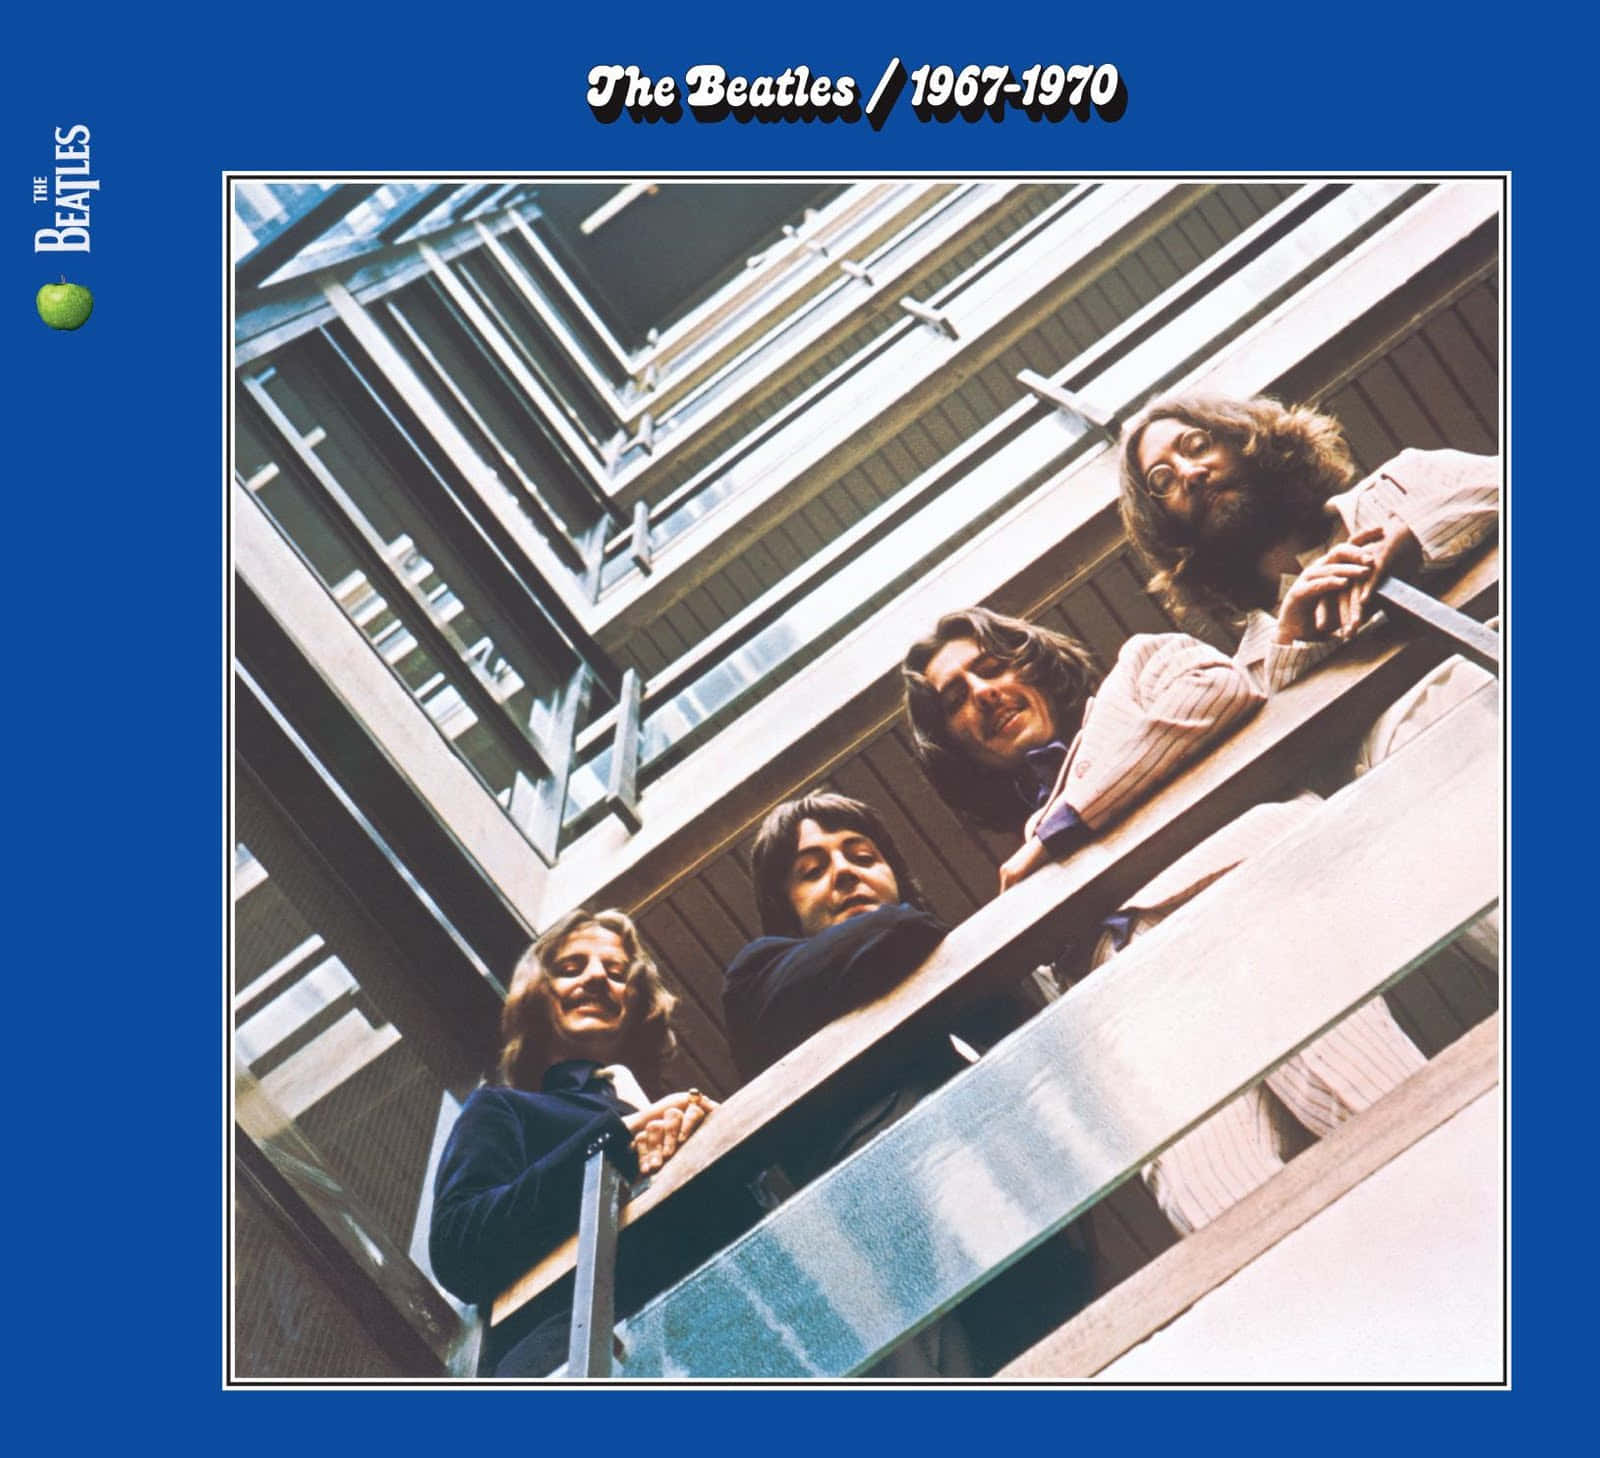 The Beatles - The Beatles 1969-1970